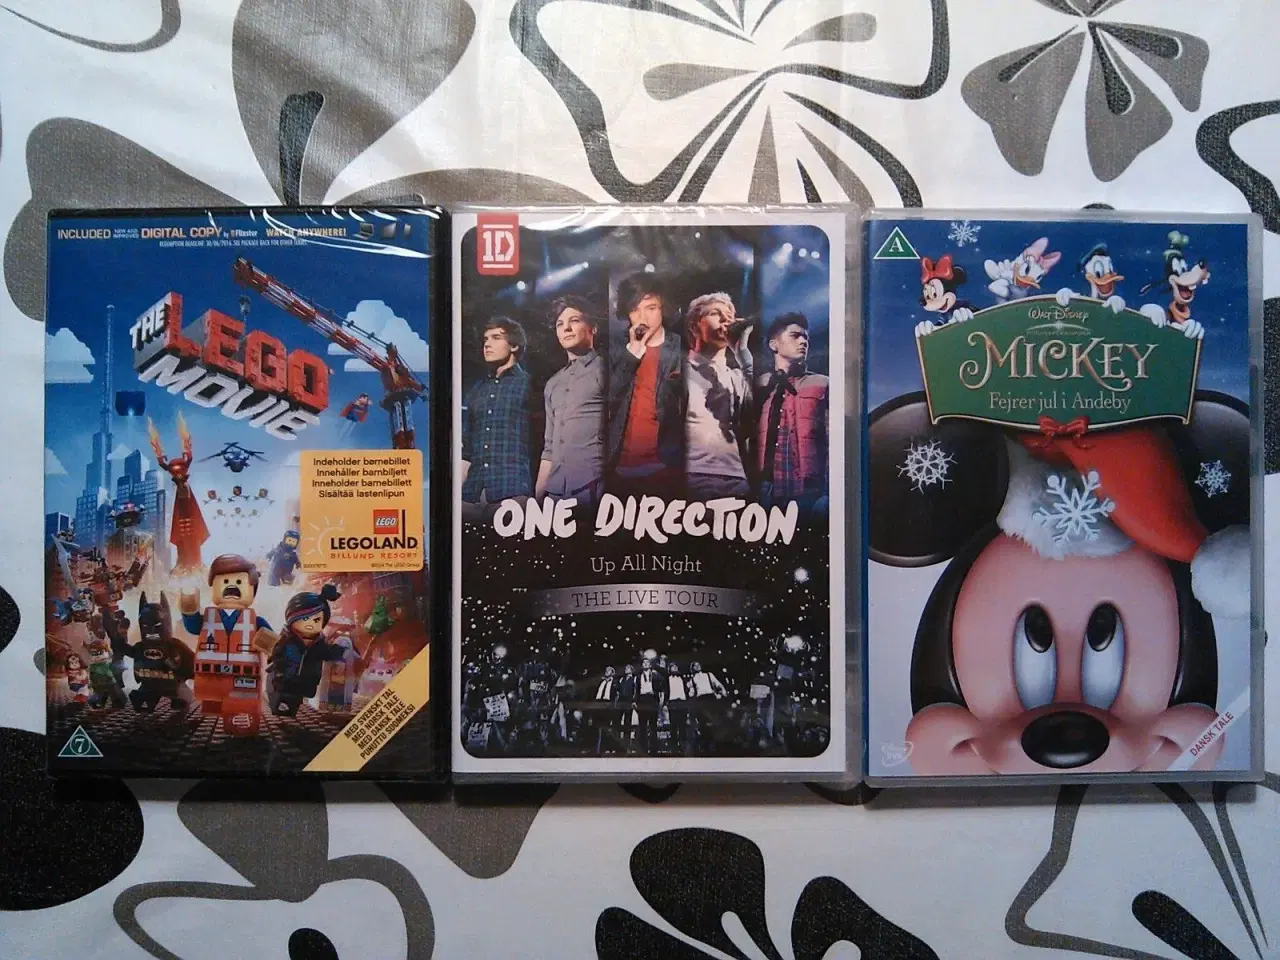 Billede 1 - LEGO The Movie, One Direction, Mickey